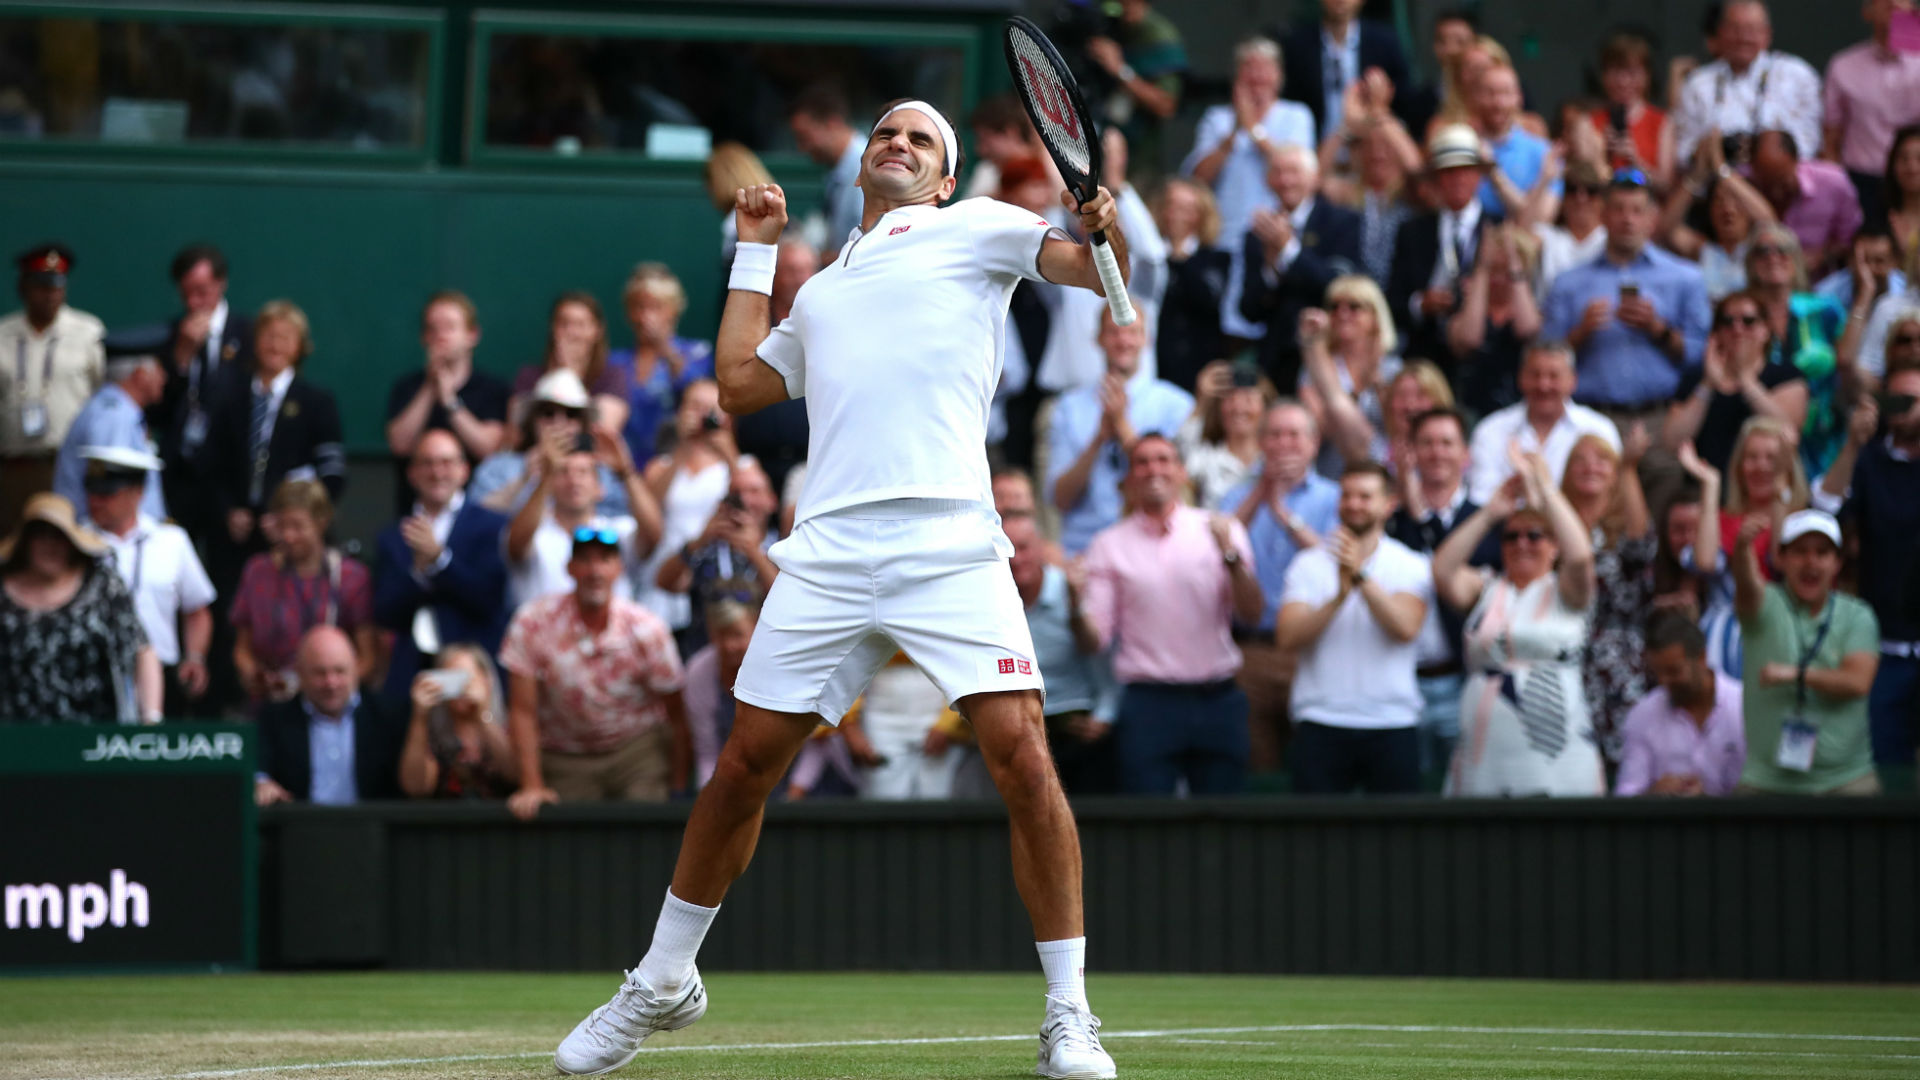 Eleven years after they last met at Wimbledon, Roger Federer and Rafael Nadal had a packed crowd gasping as they put on another epic show.